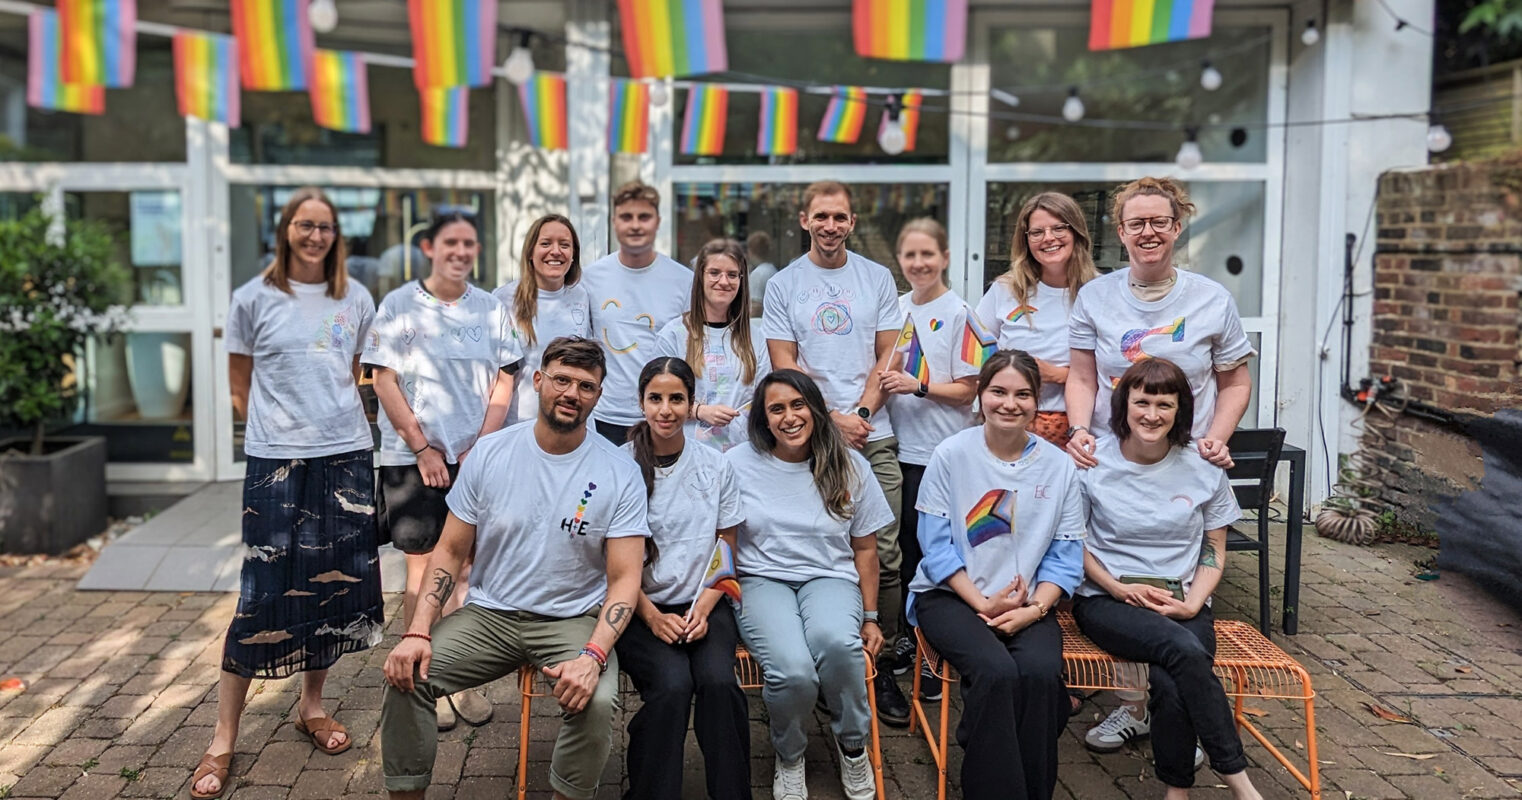 HLW London celebrates Pride Month with a T-shirt decoration party and raffle to raise funds for global philanthropy efforts supporting mental health.